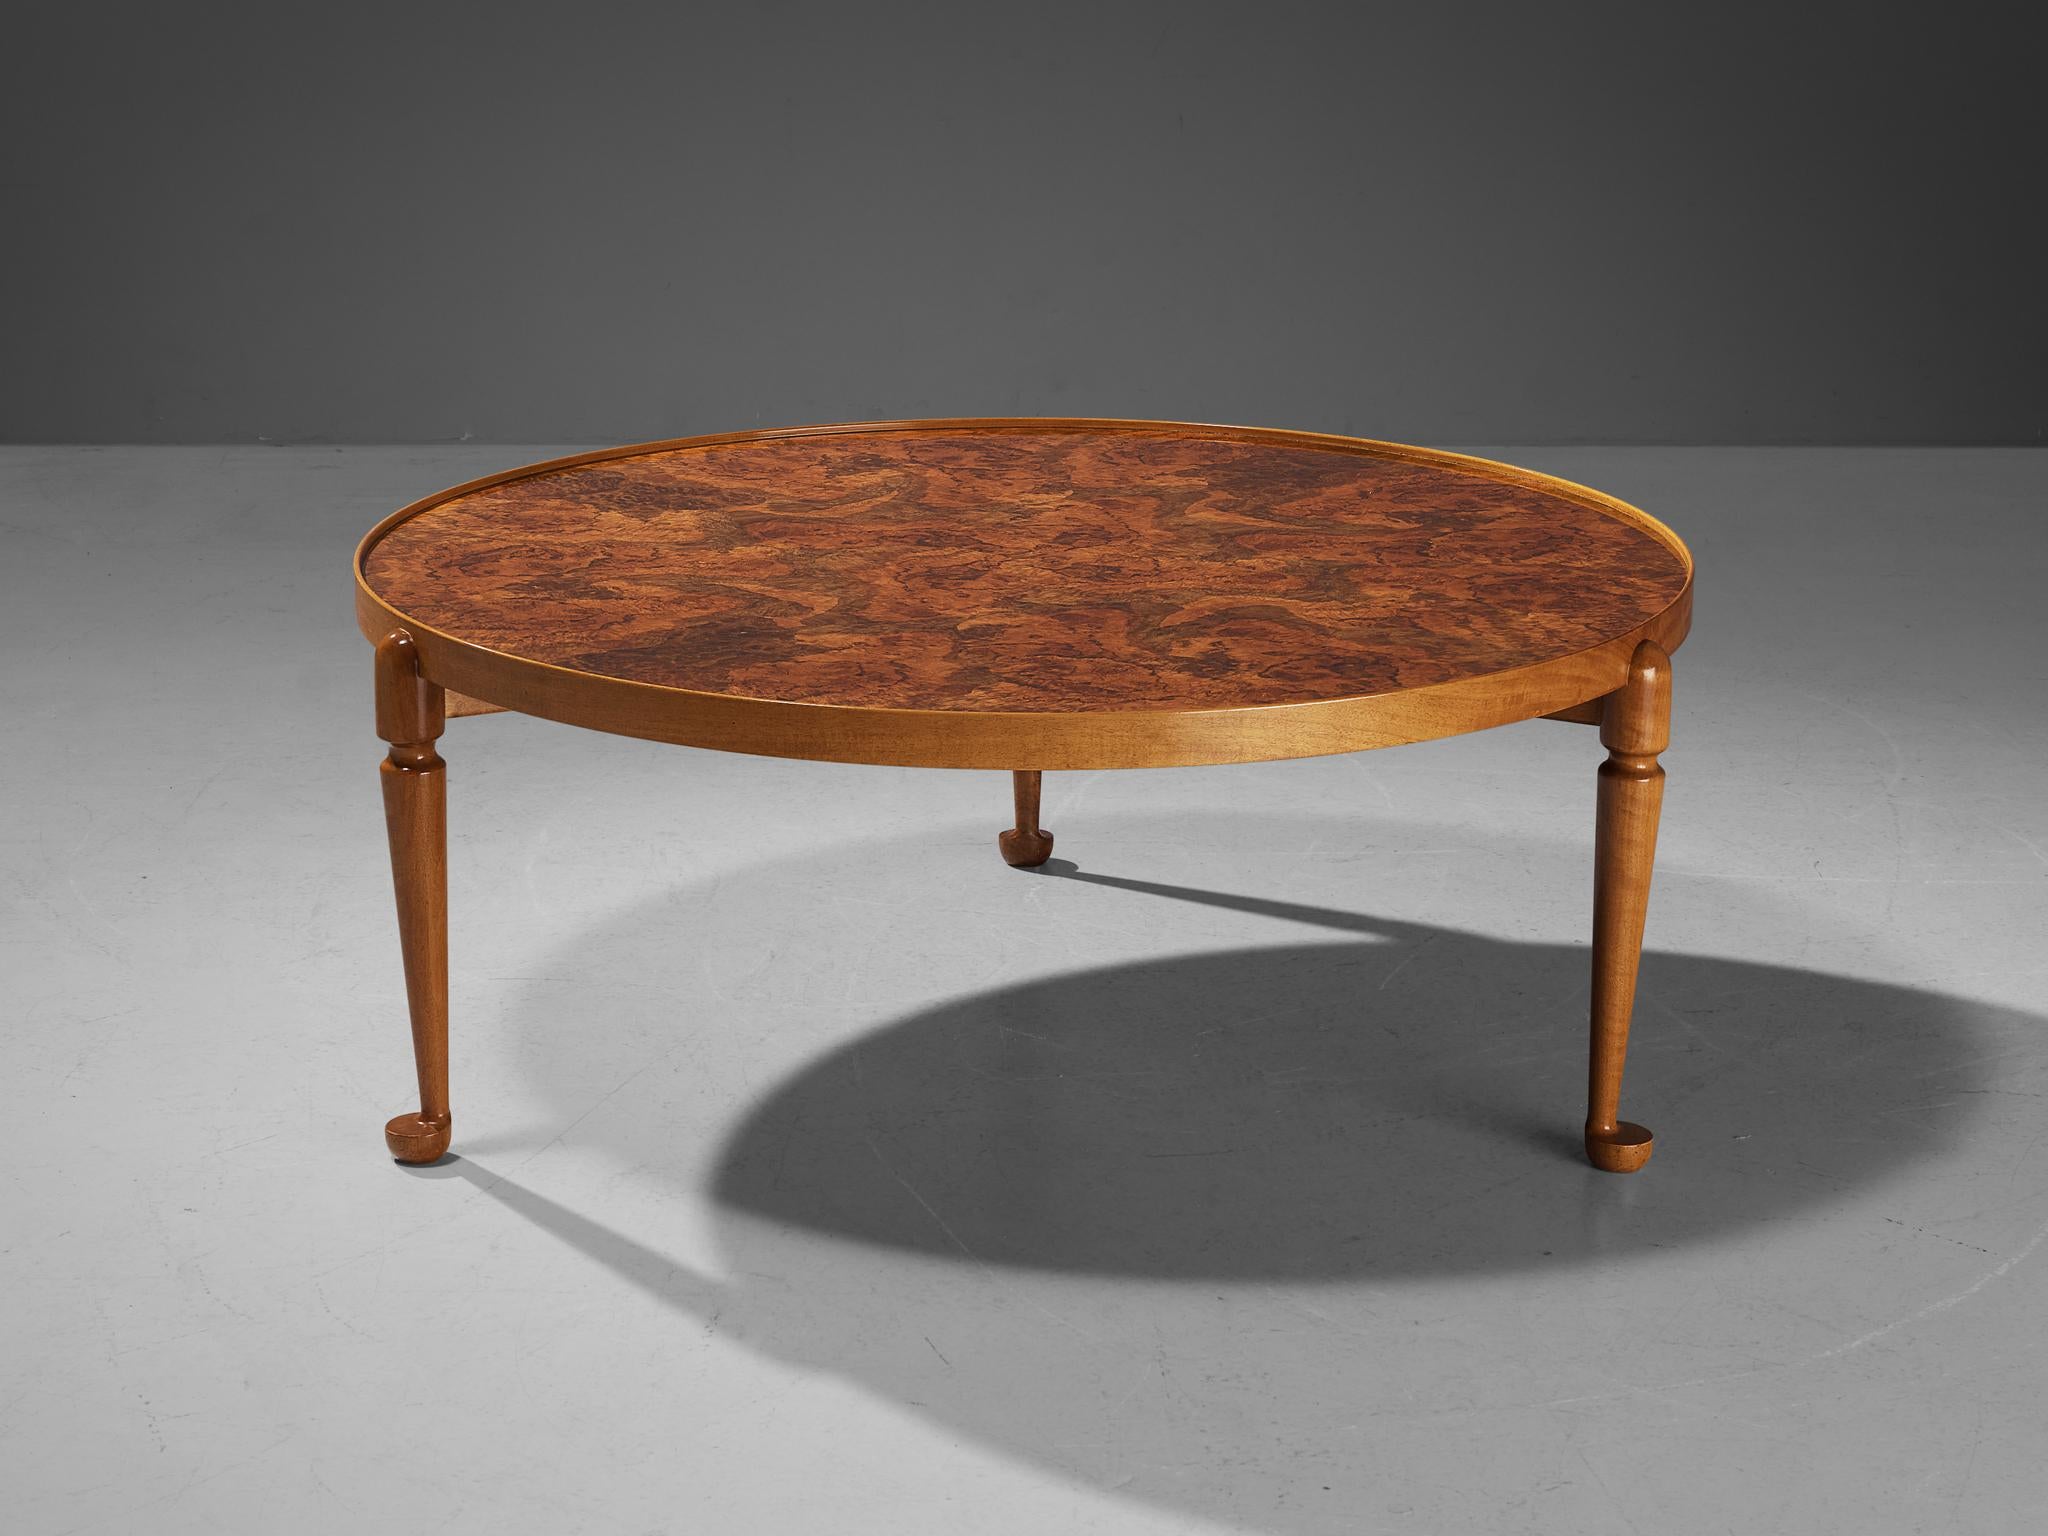 Josef Frank for Svenskt Tenn, coffee table model 2139, walnut burl top, walnut legs, maple rim, Sweden, design 1948

This classic coffee table is designed by Josef Frank in 1948. This specific coffee table is produced circa 1955, meaning that it is